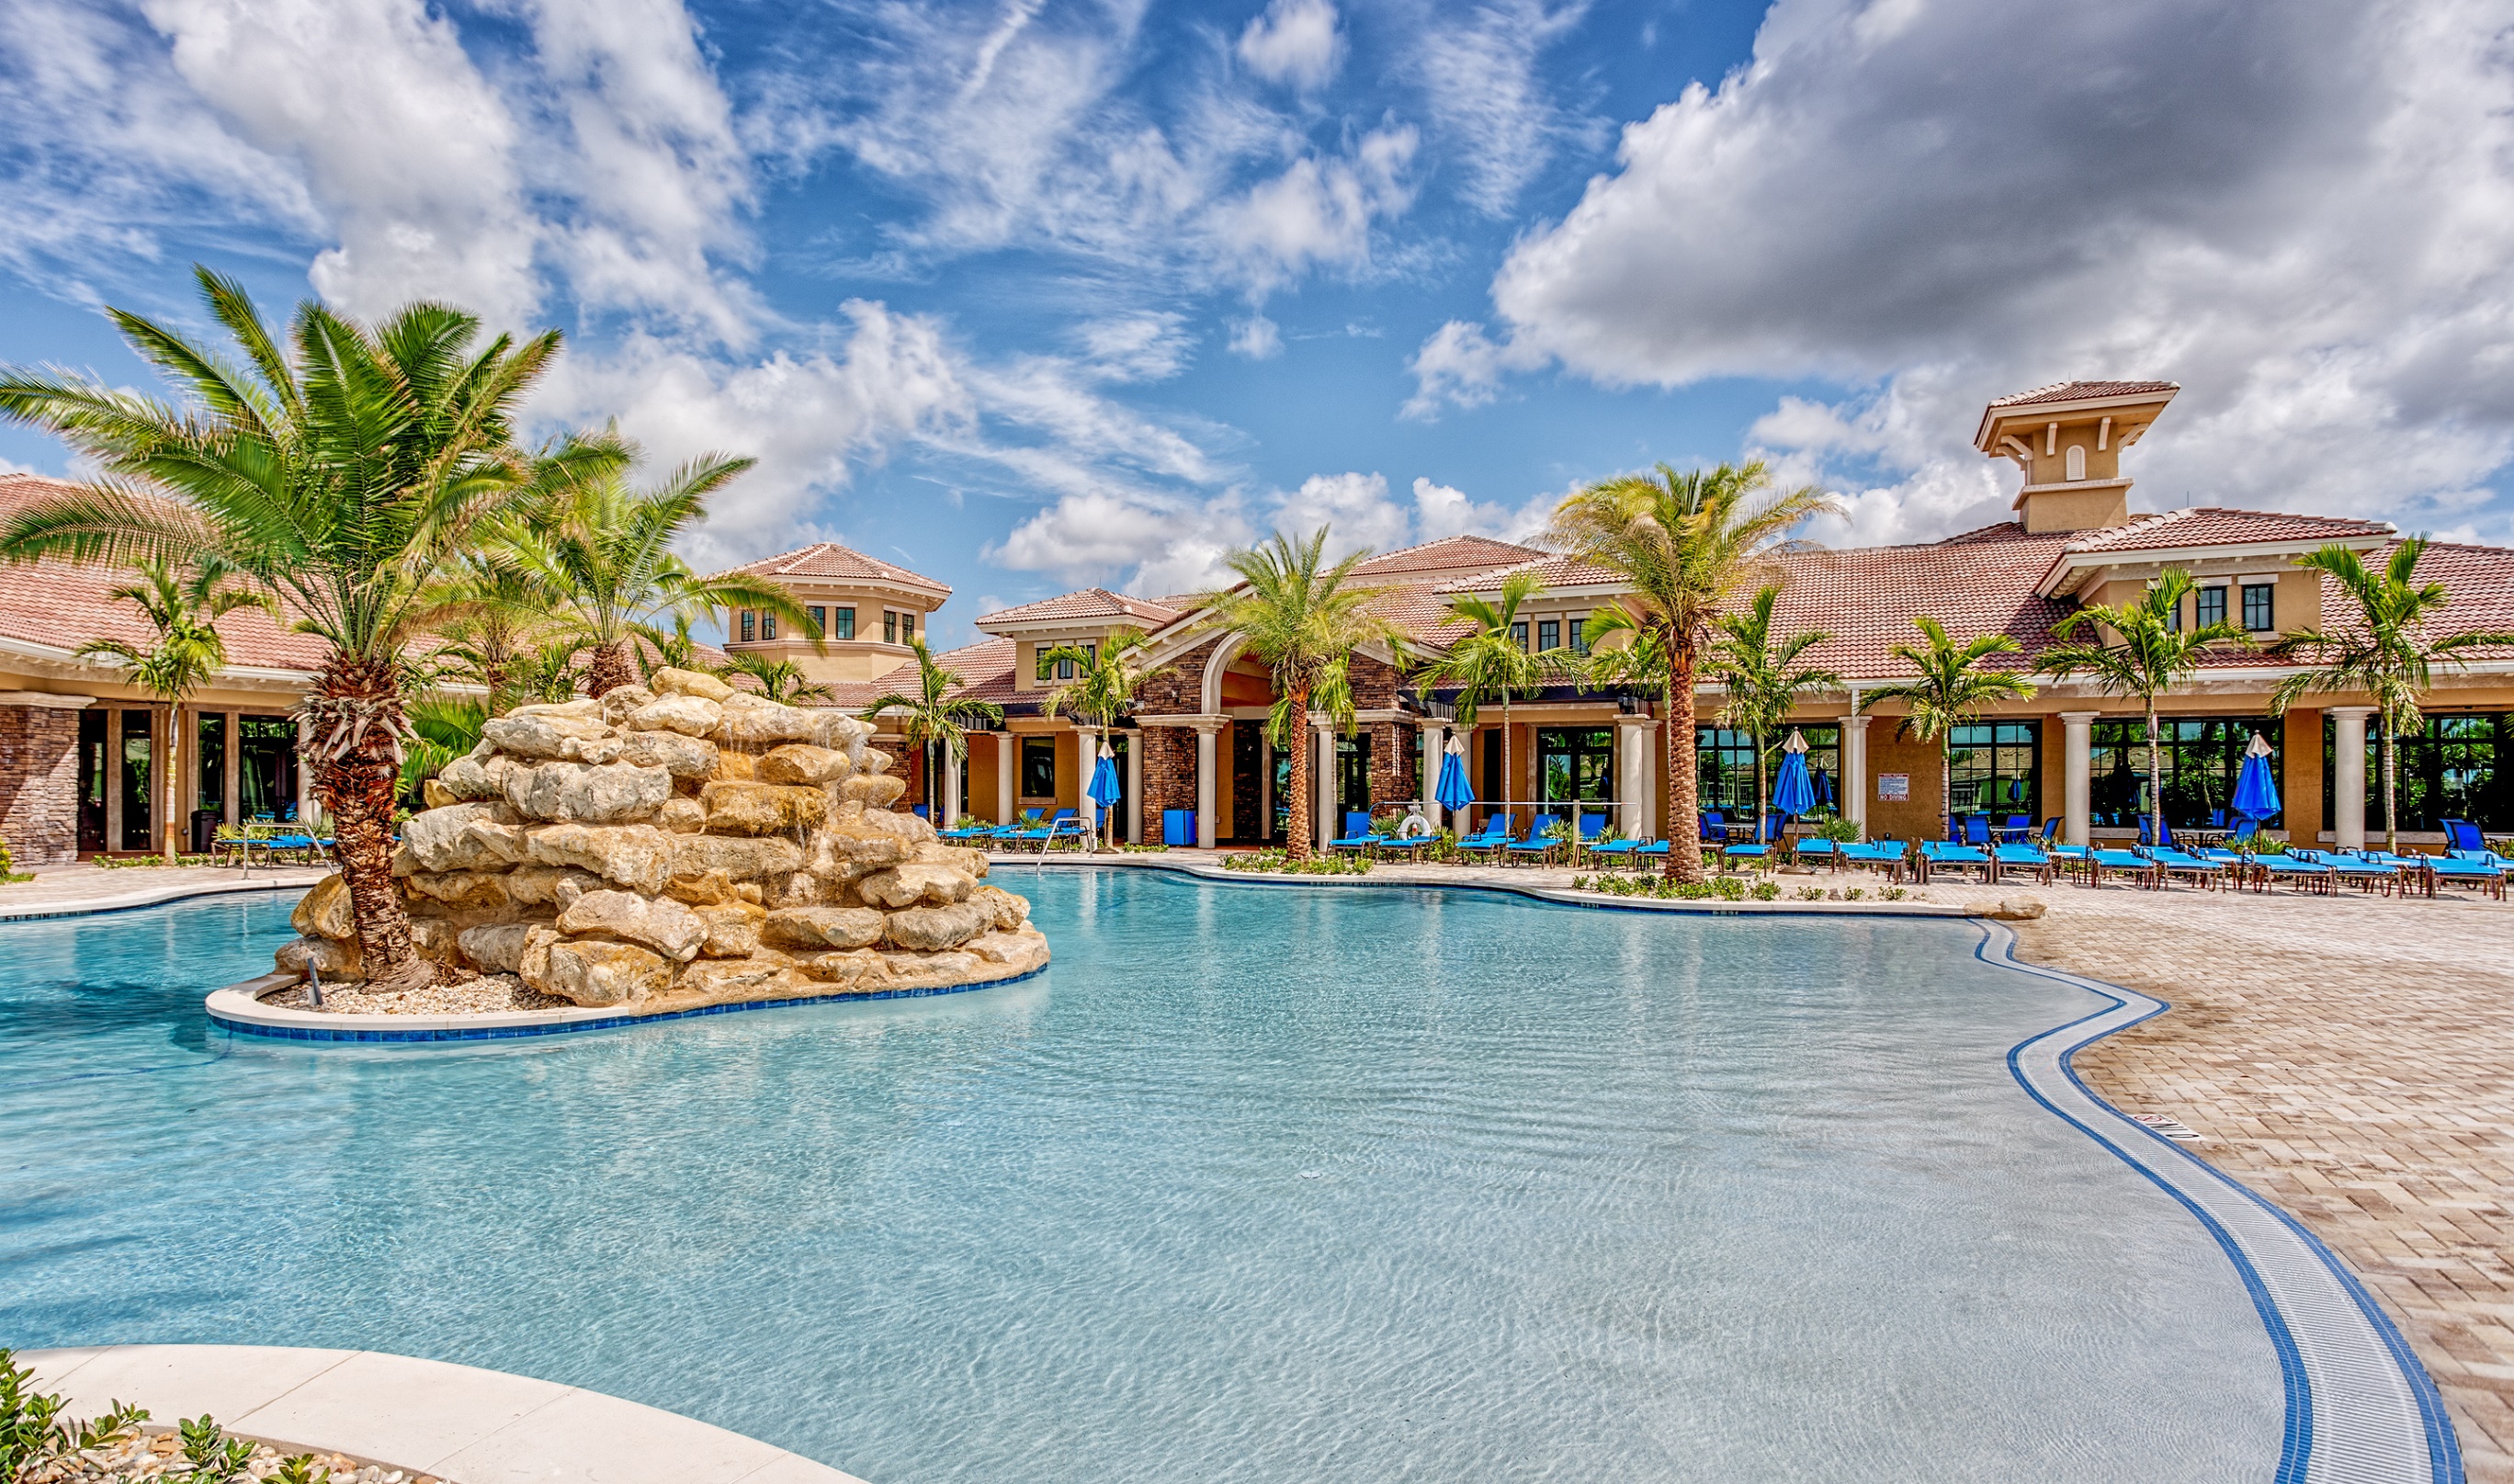 Residents of K. Hovnanian’s® Four Seasons at Parkland enjoy access to a tropical style, beach-entry swimming pool, separate lap pool, and heated spa and cabana,  among a host of other amenities.